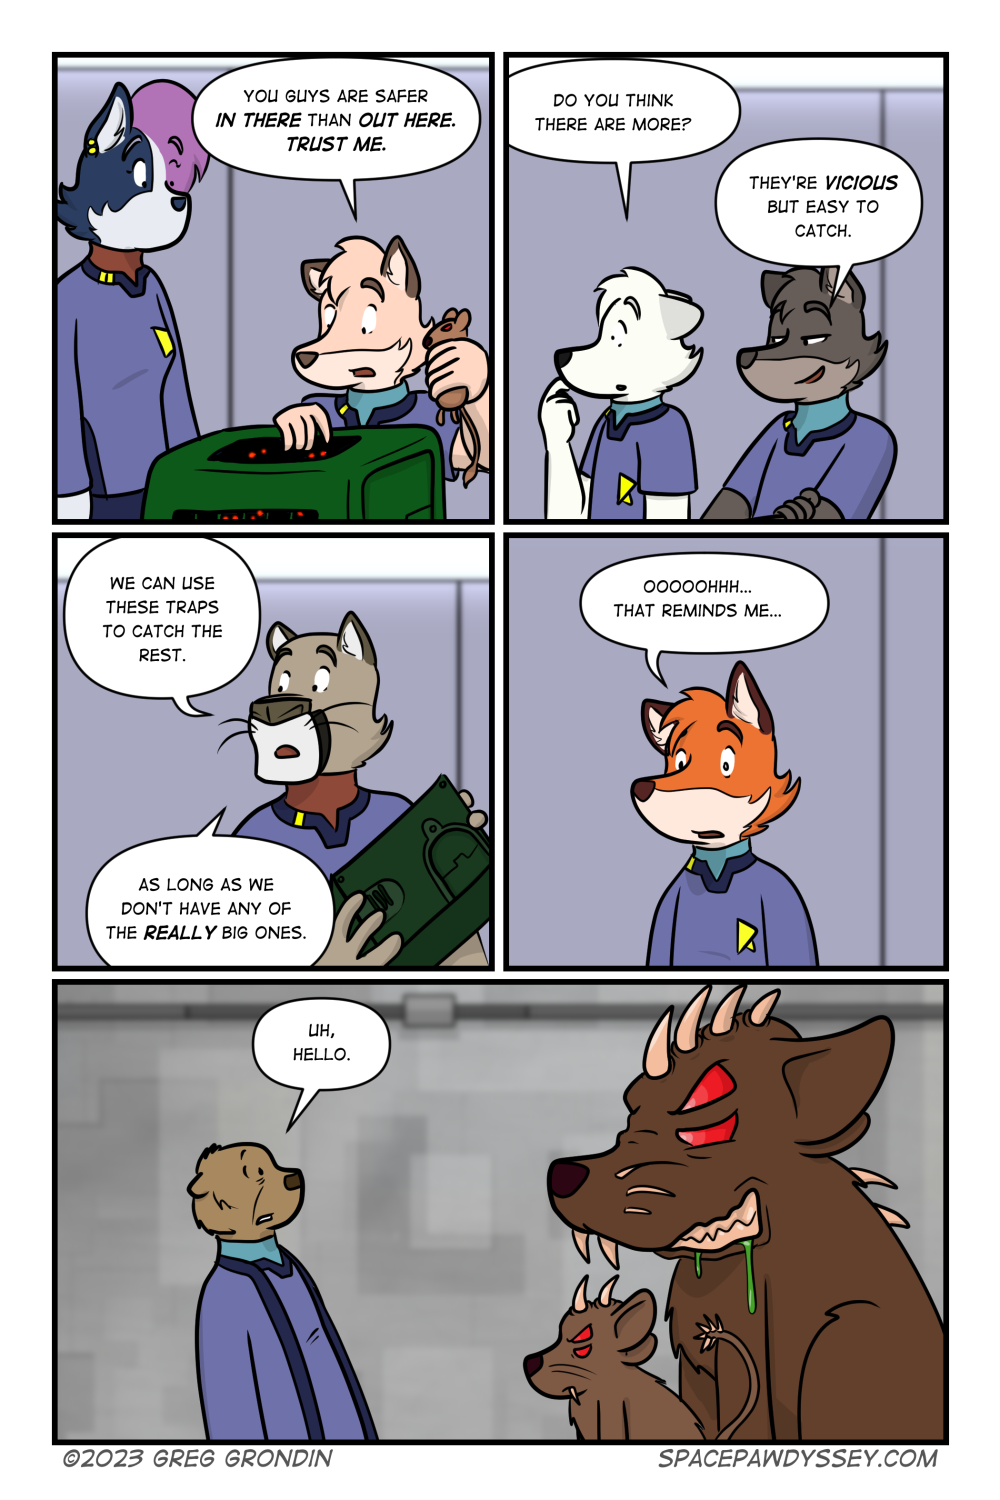 Space Pawdyssey #619